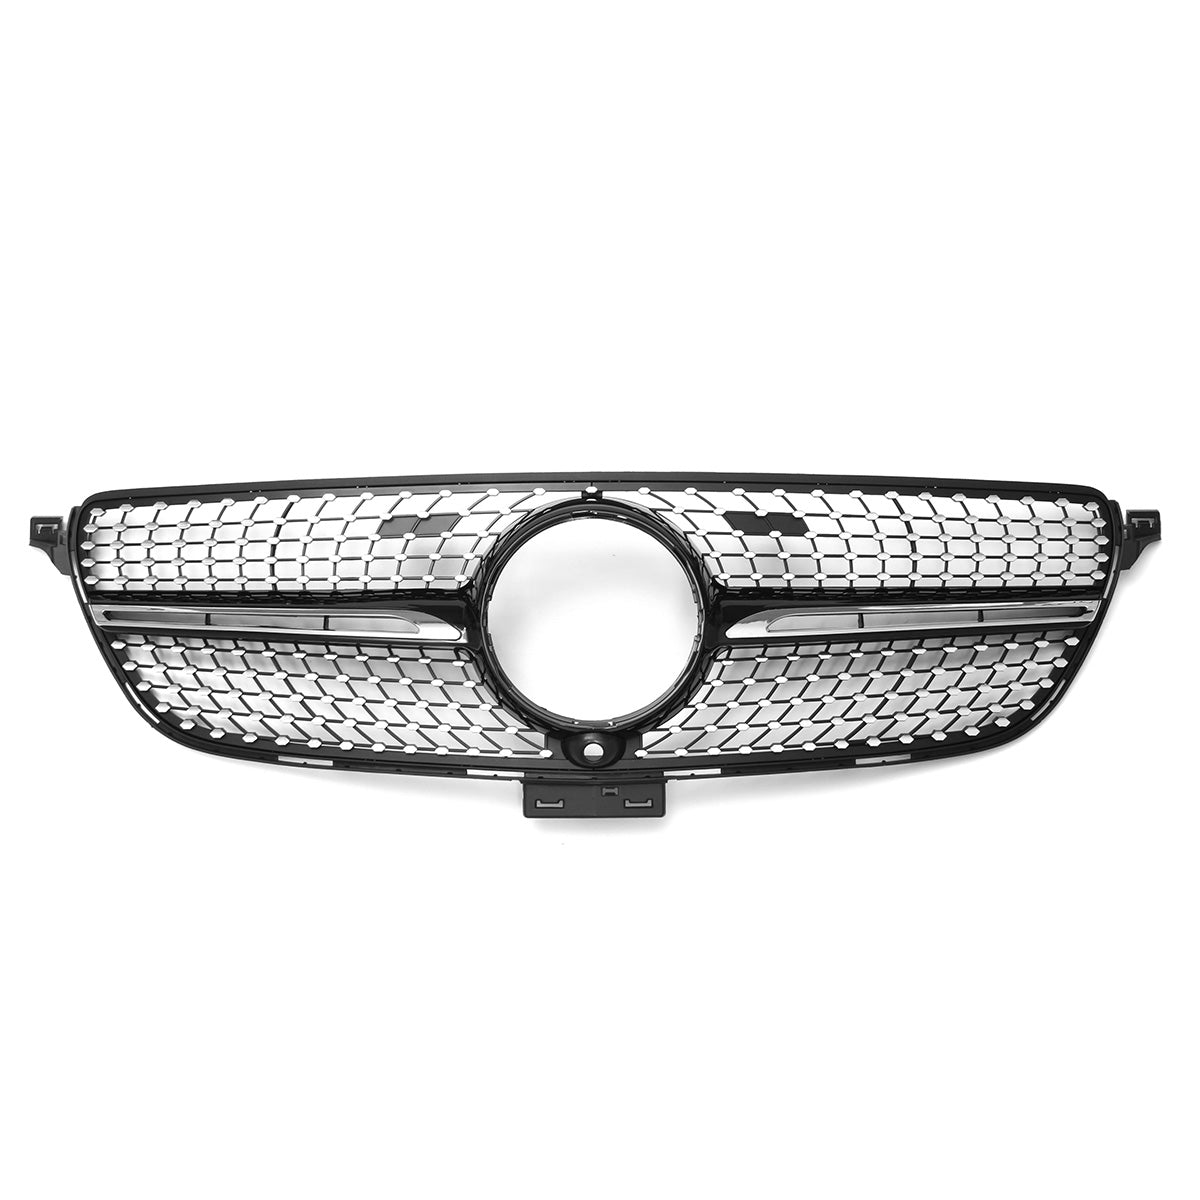 White Smoke Black Diamond Front Grille Grill For Mercedes Benz GLE Coupe W292 C292 GLE350 2015-18